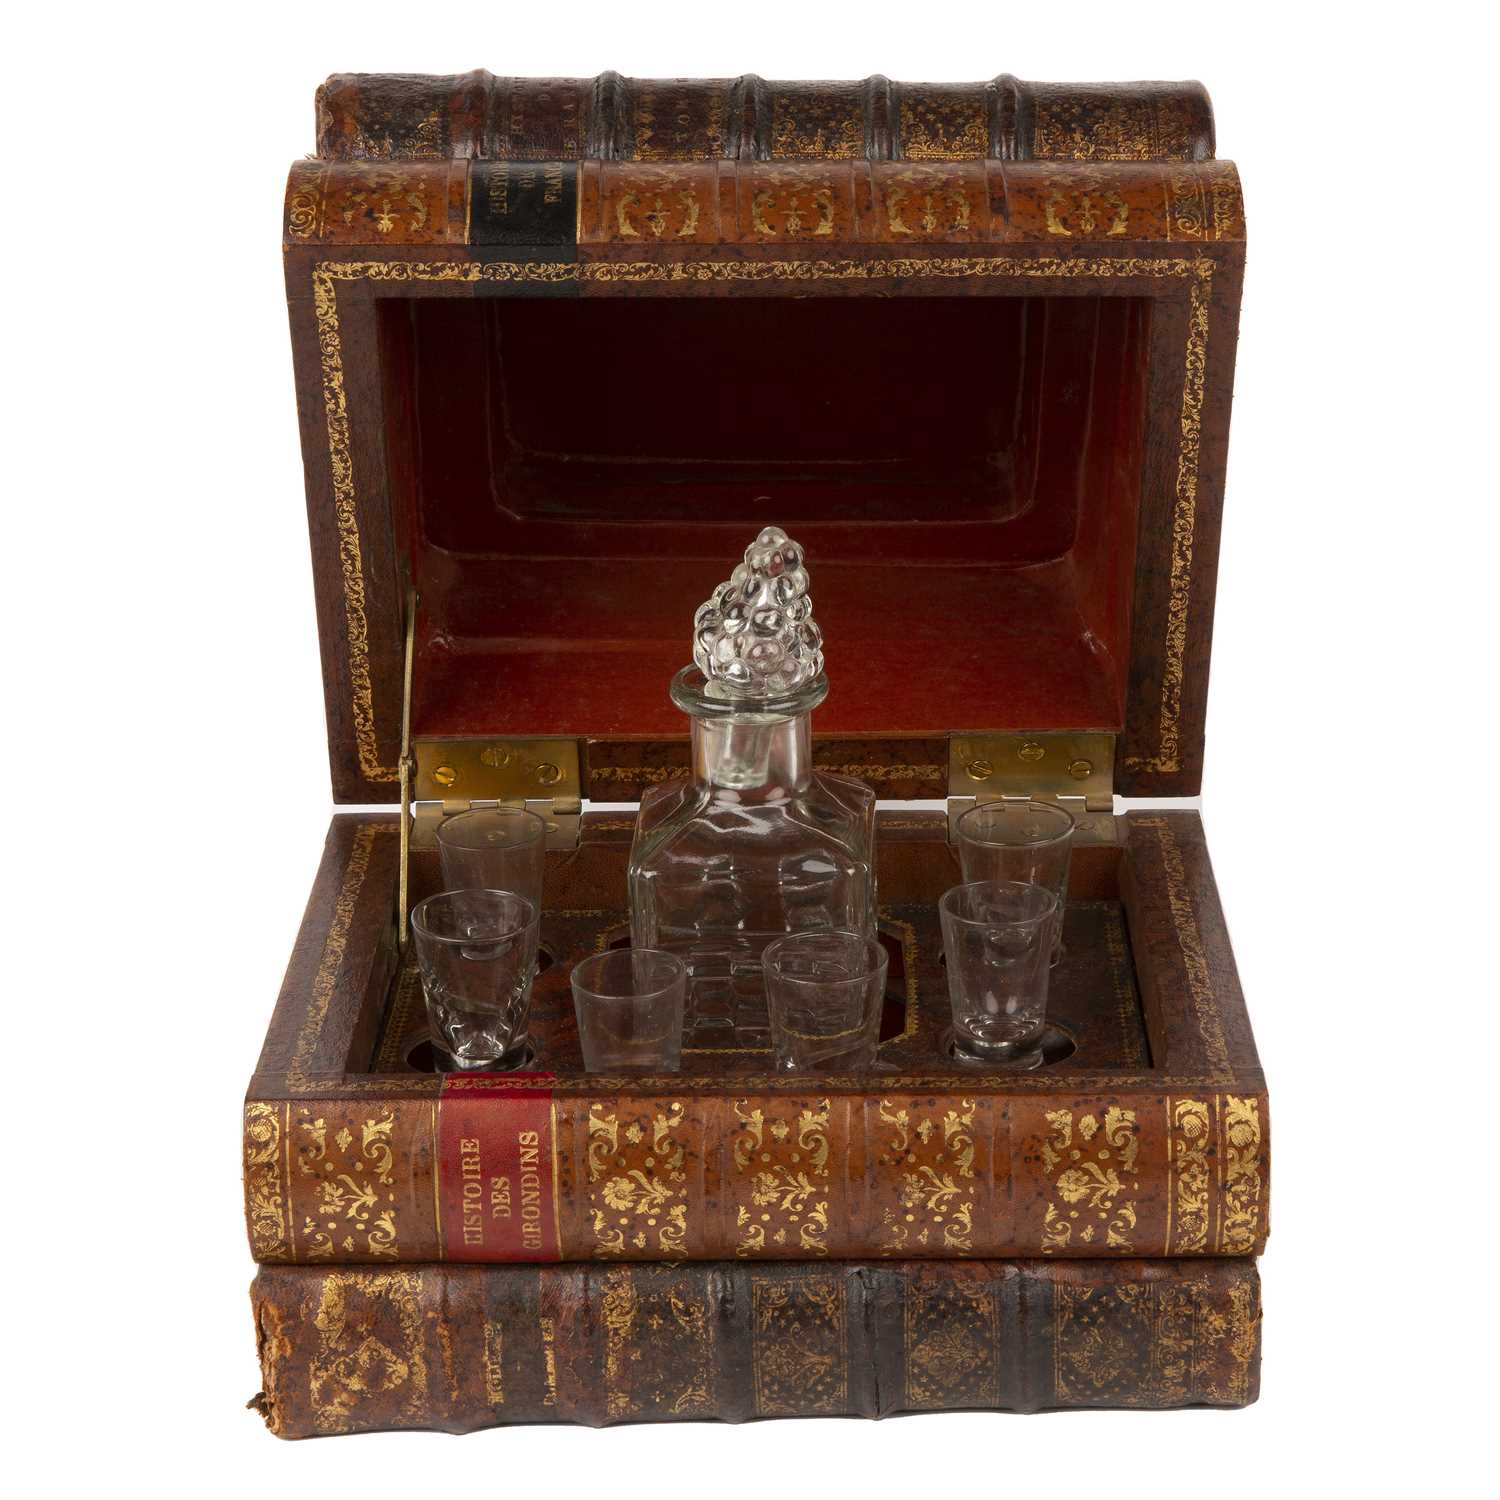 An early 20th century French leather bound Tantalus in the form of a stack of books, with later